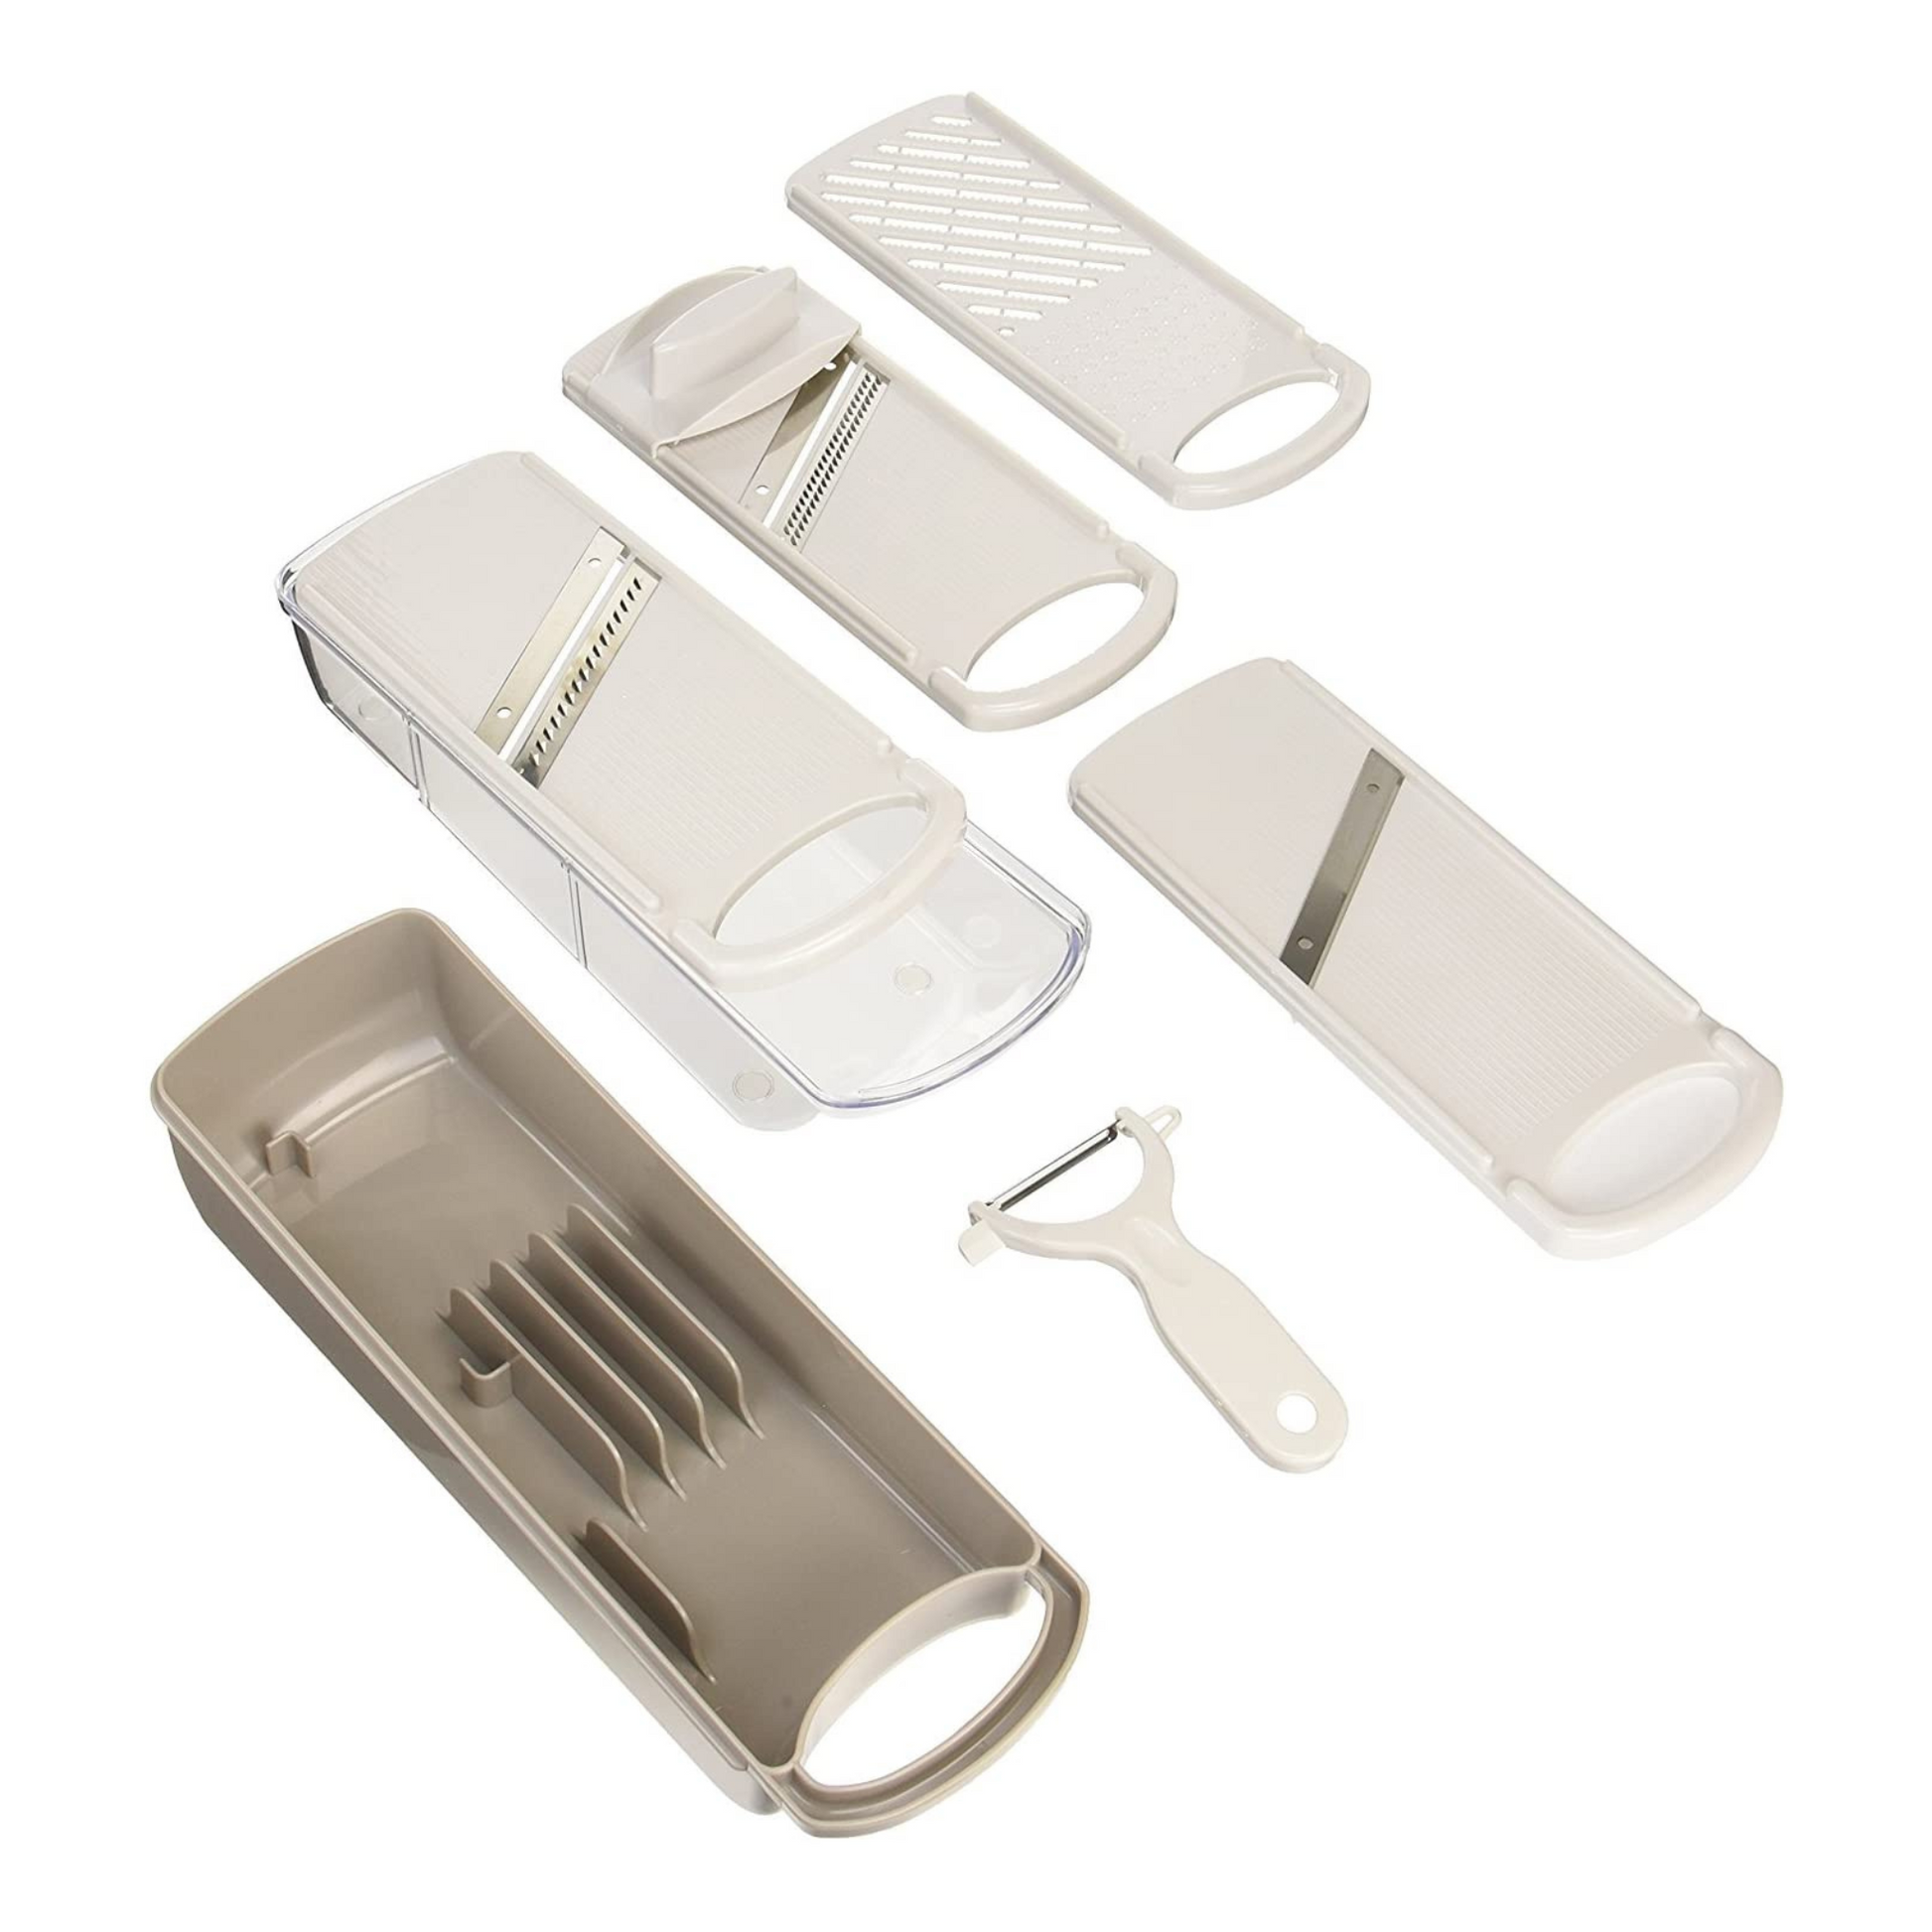 How to Choose (and Use) a Mandoline Slicer